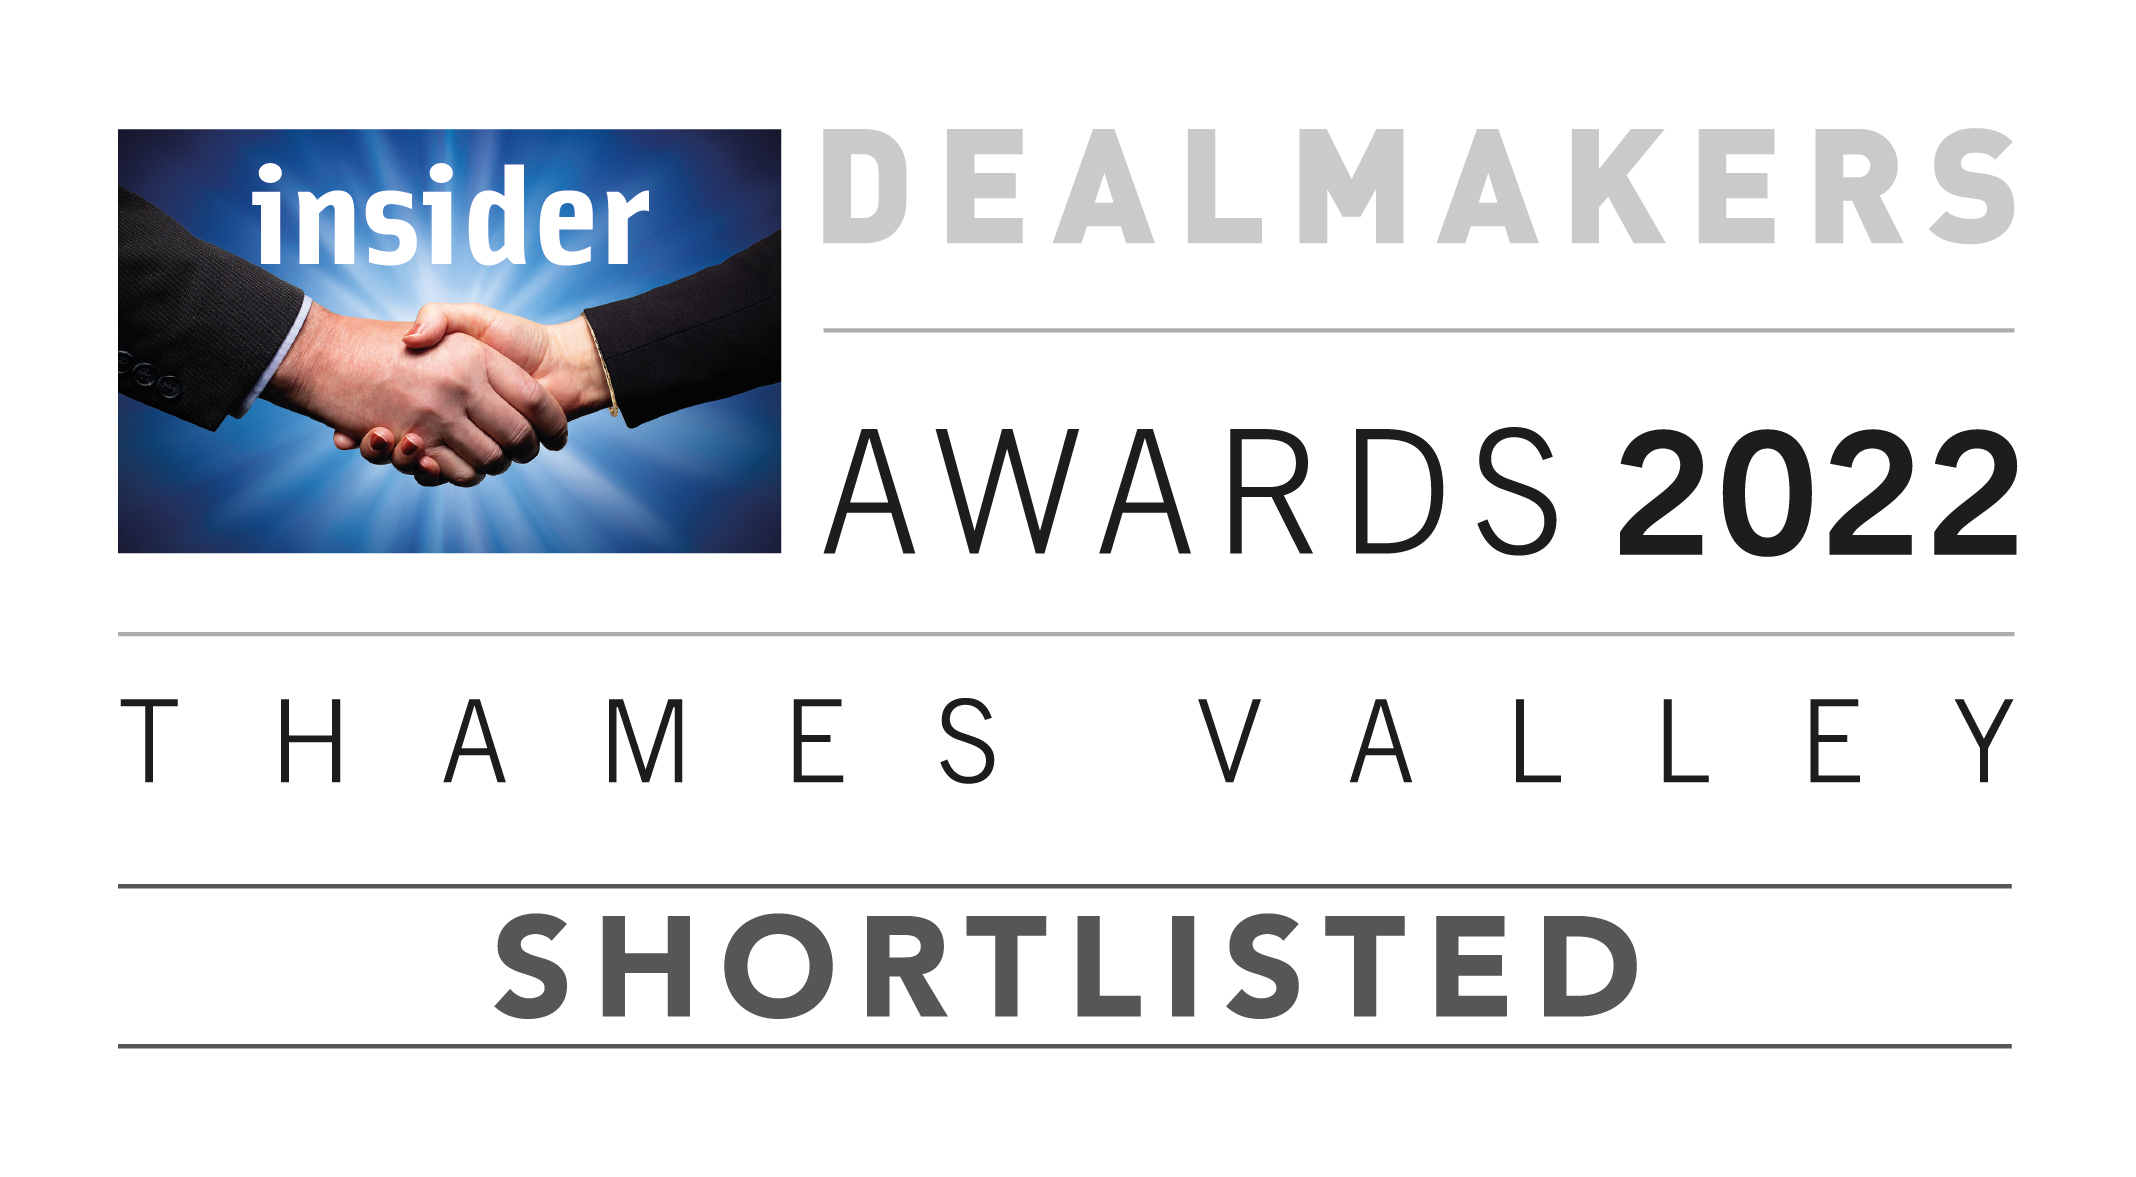 WestBridge shortlisted in Thames Valley Dealmakers Awards